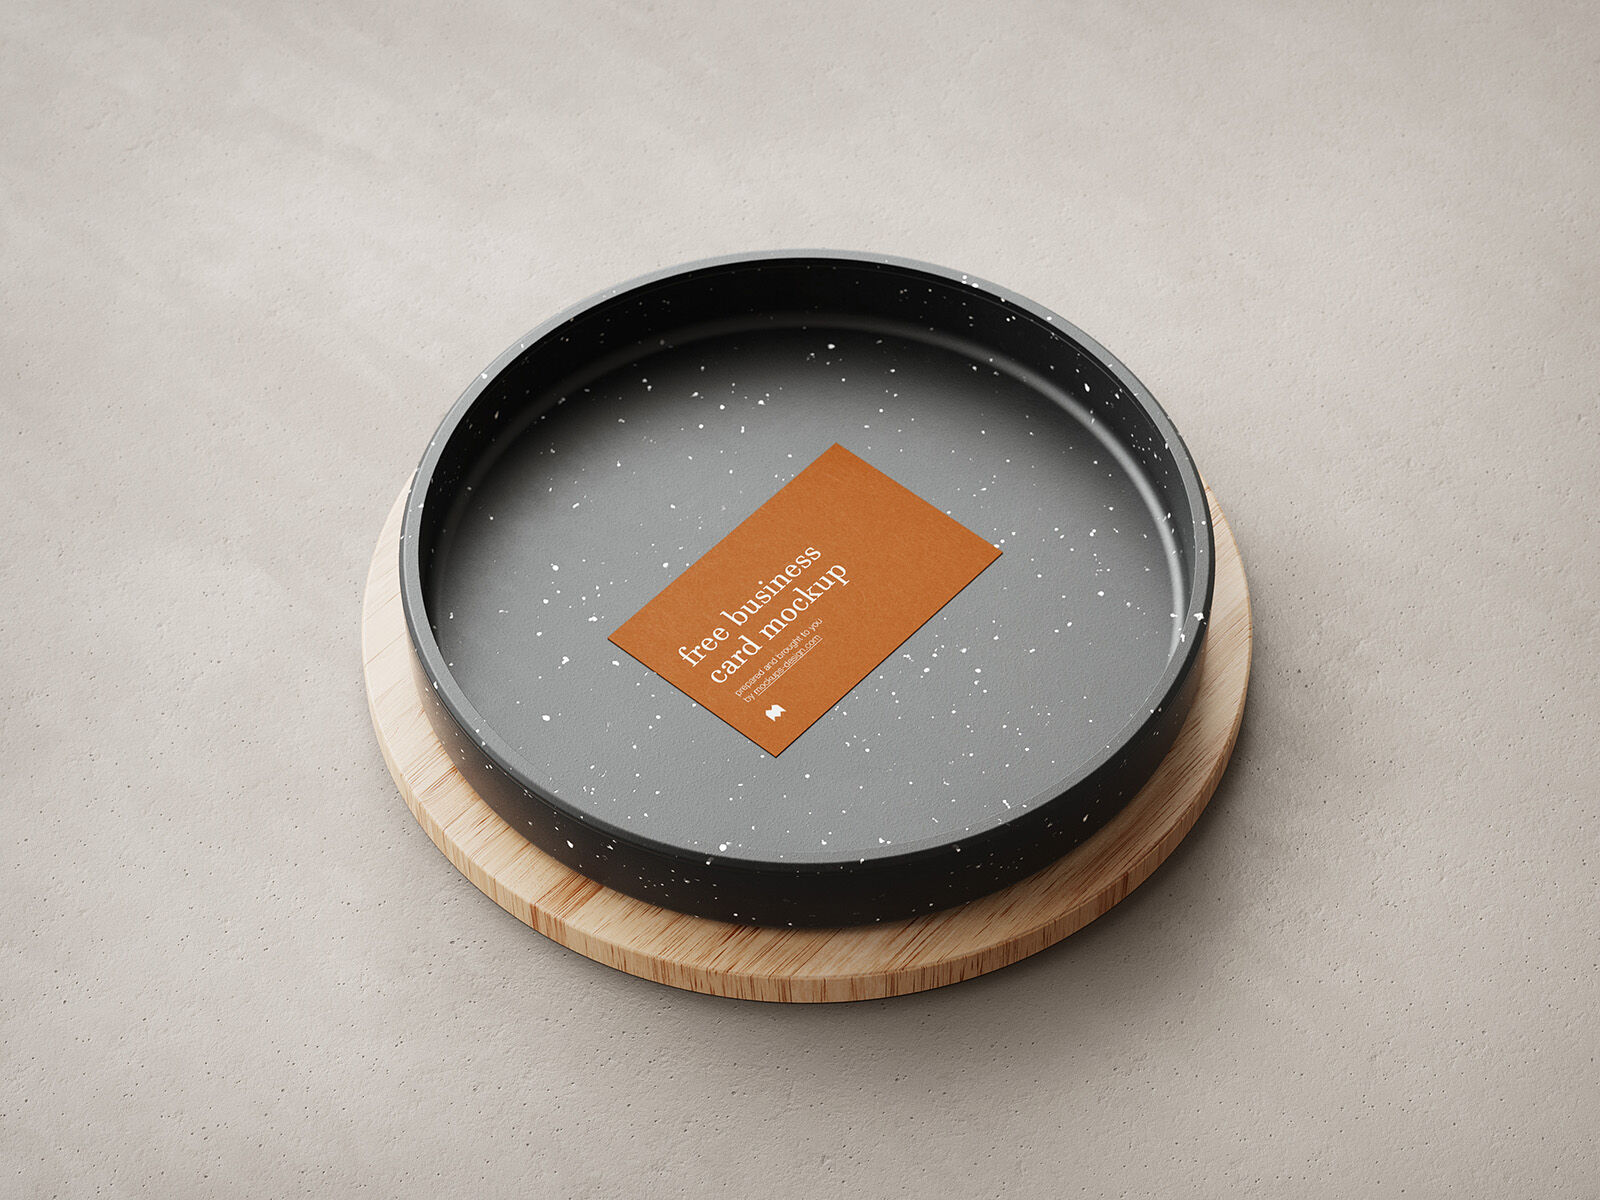 Five Mockups Featuring Business Cards and Ceramic Pan on Wooden Circle FREE PSD